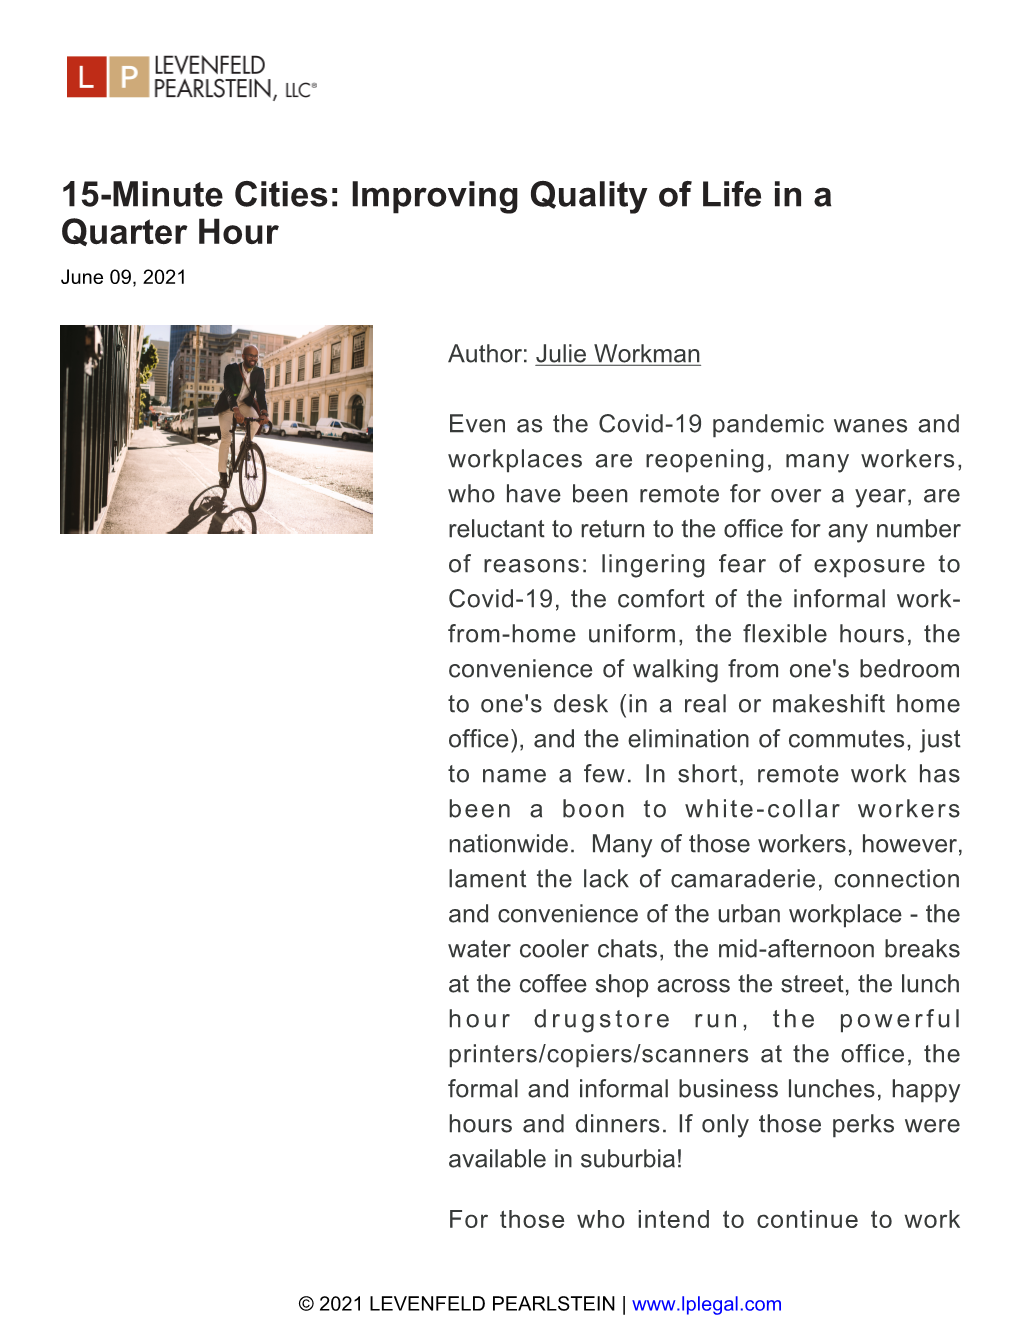 15-Minute Cities: Improving Quality of Life in a Quarter Hour